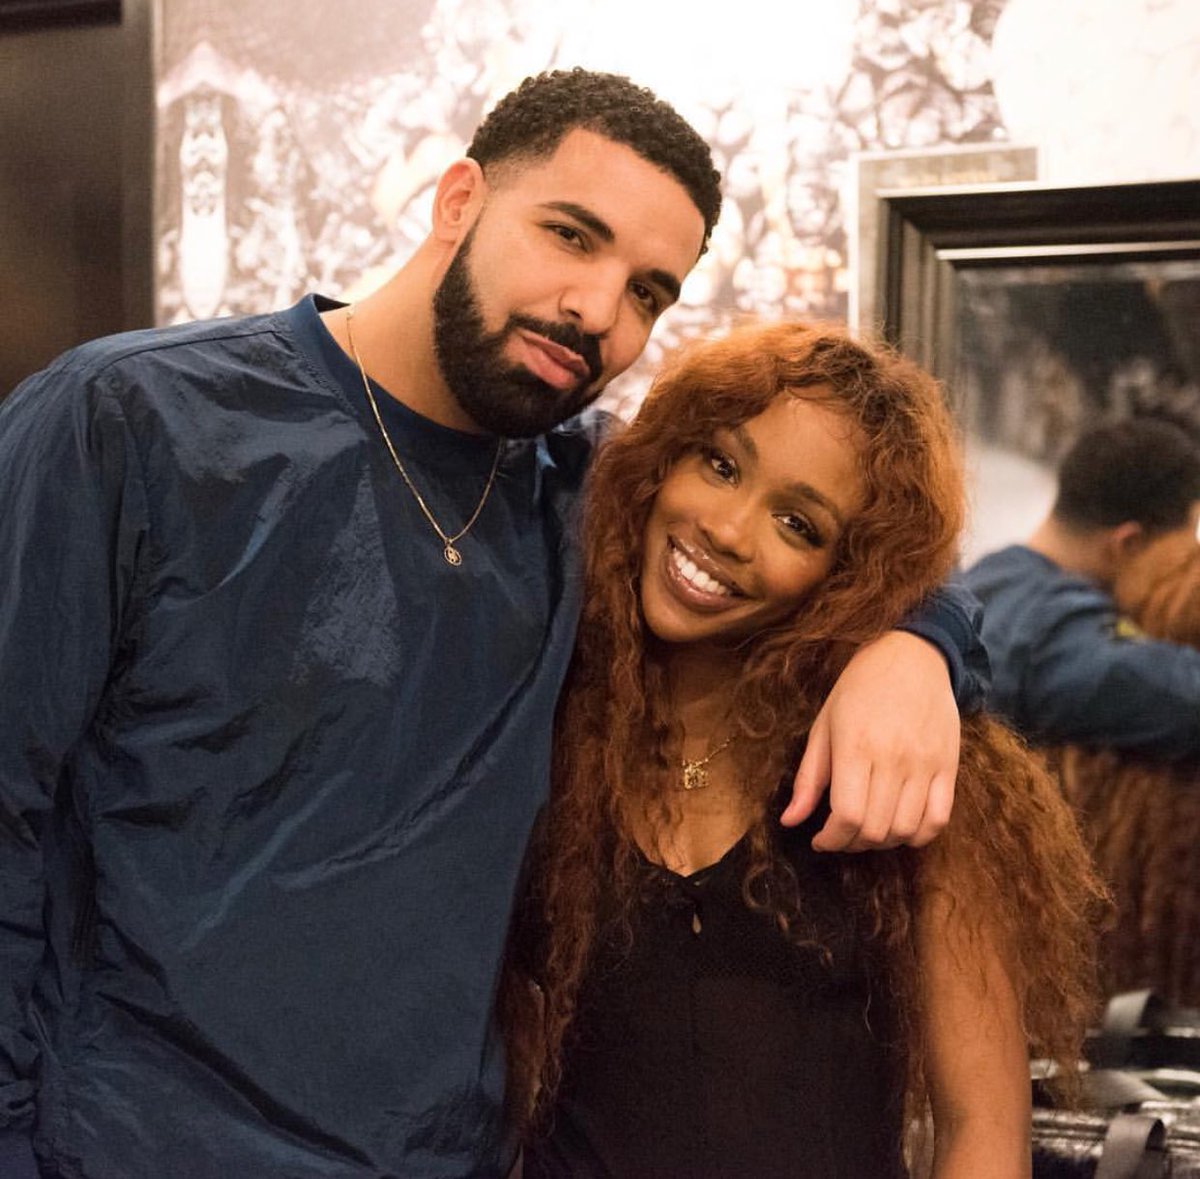 Drake and Sza tonight at her concert in Toronto. #CTRLthetour 📸@Visualbass